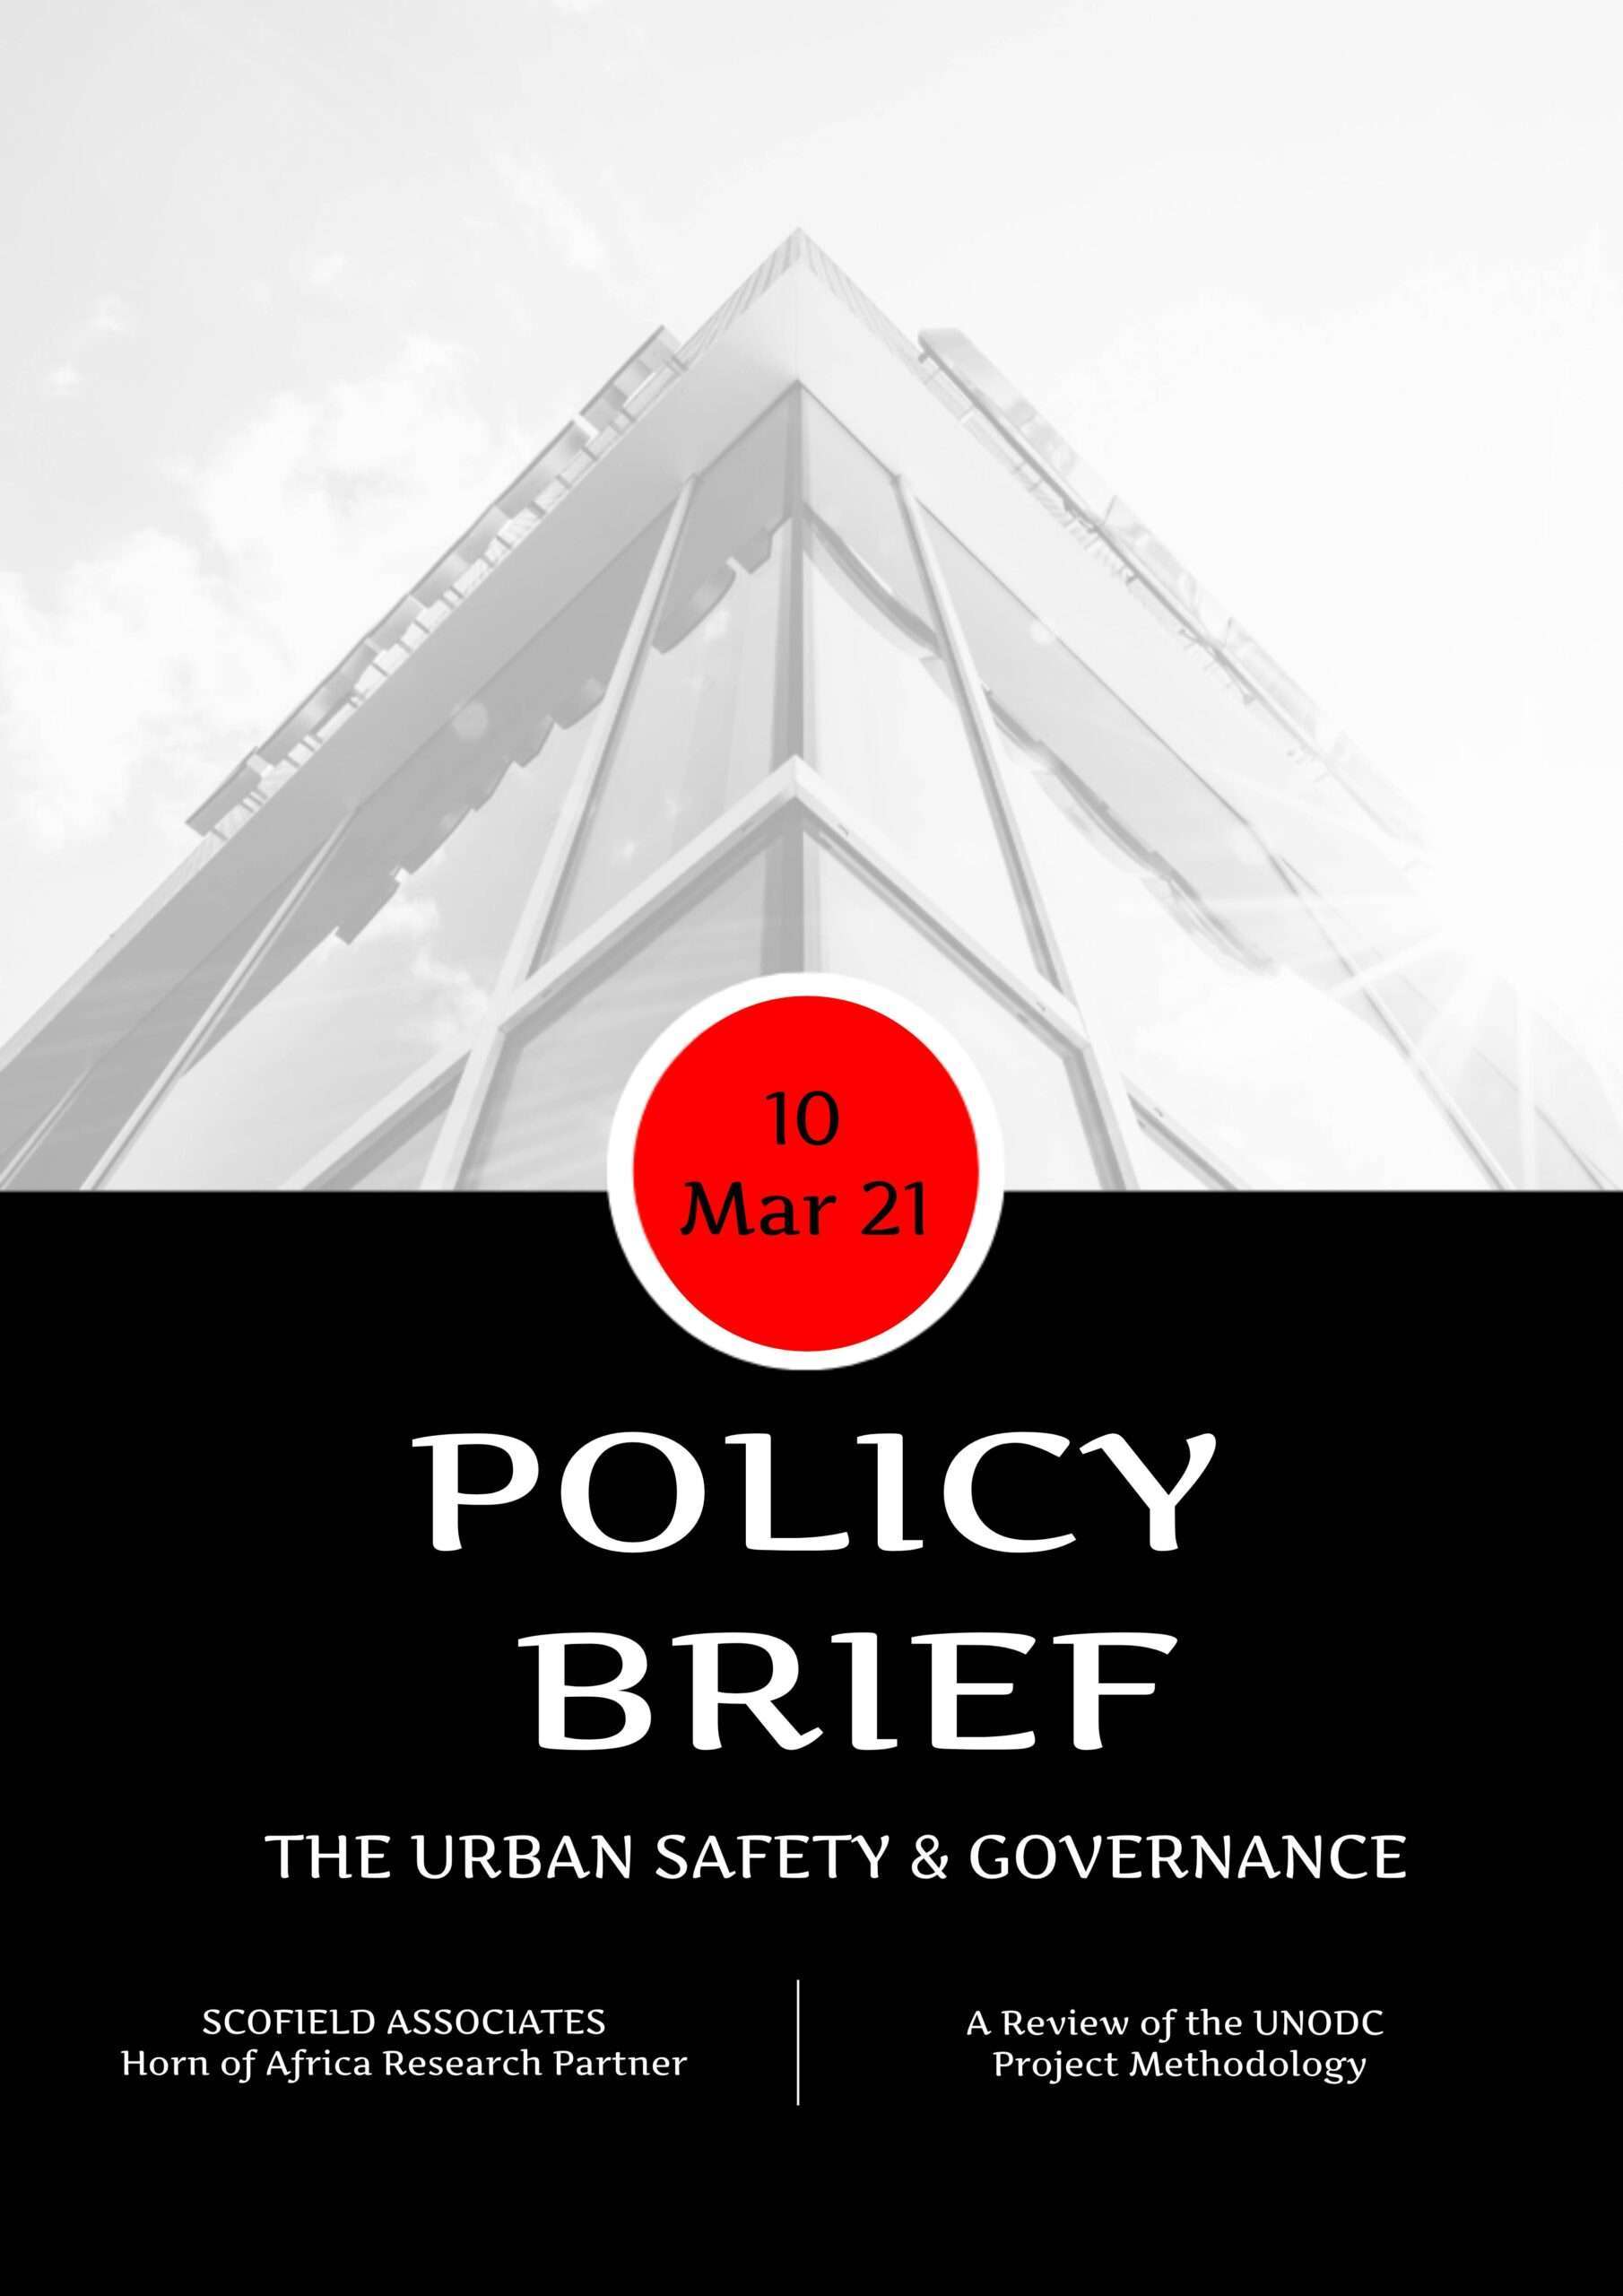 Policy Brief Covering the Urban Safety & Governance Project